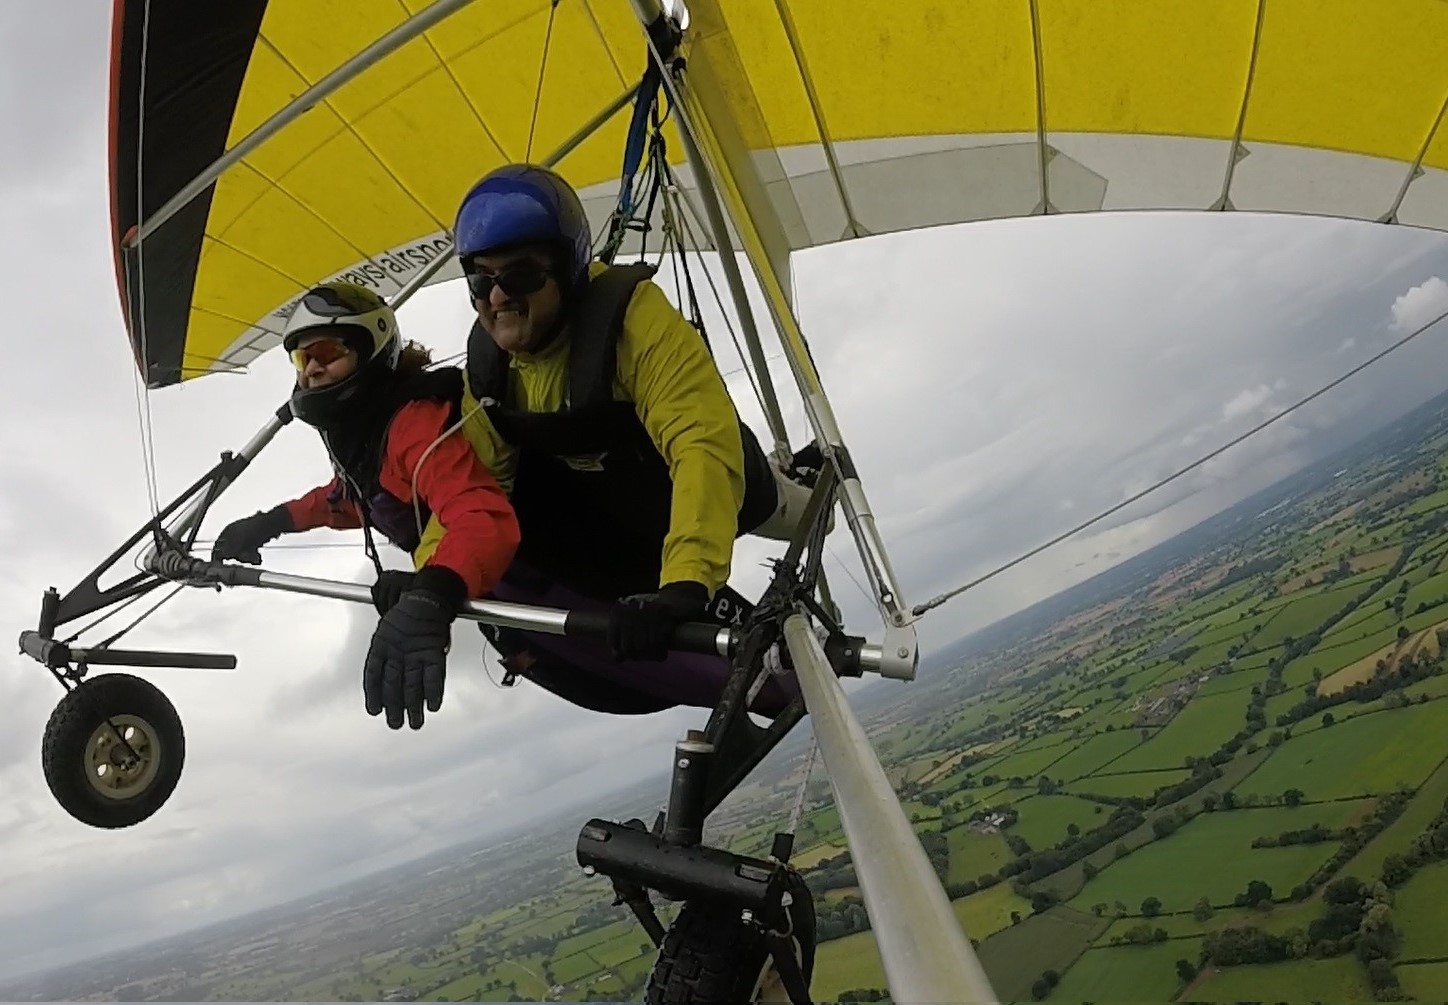 A man and a woman tandem hang gliding with hills below them